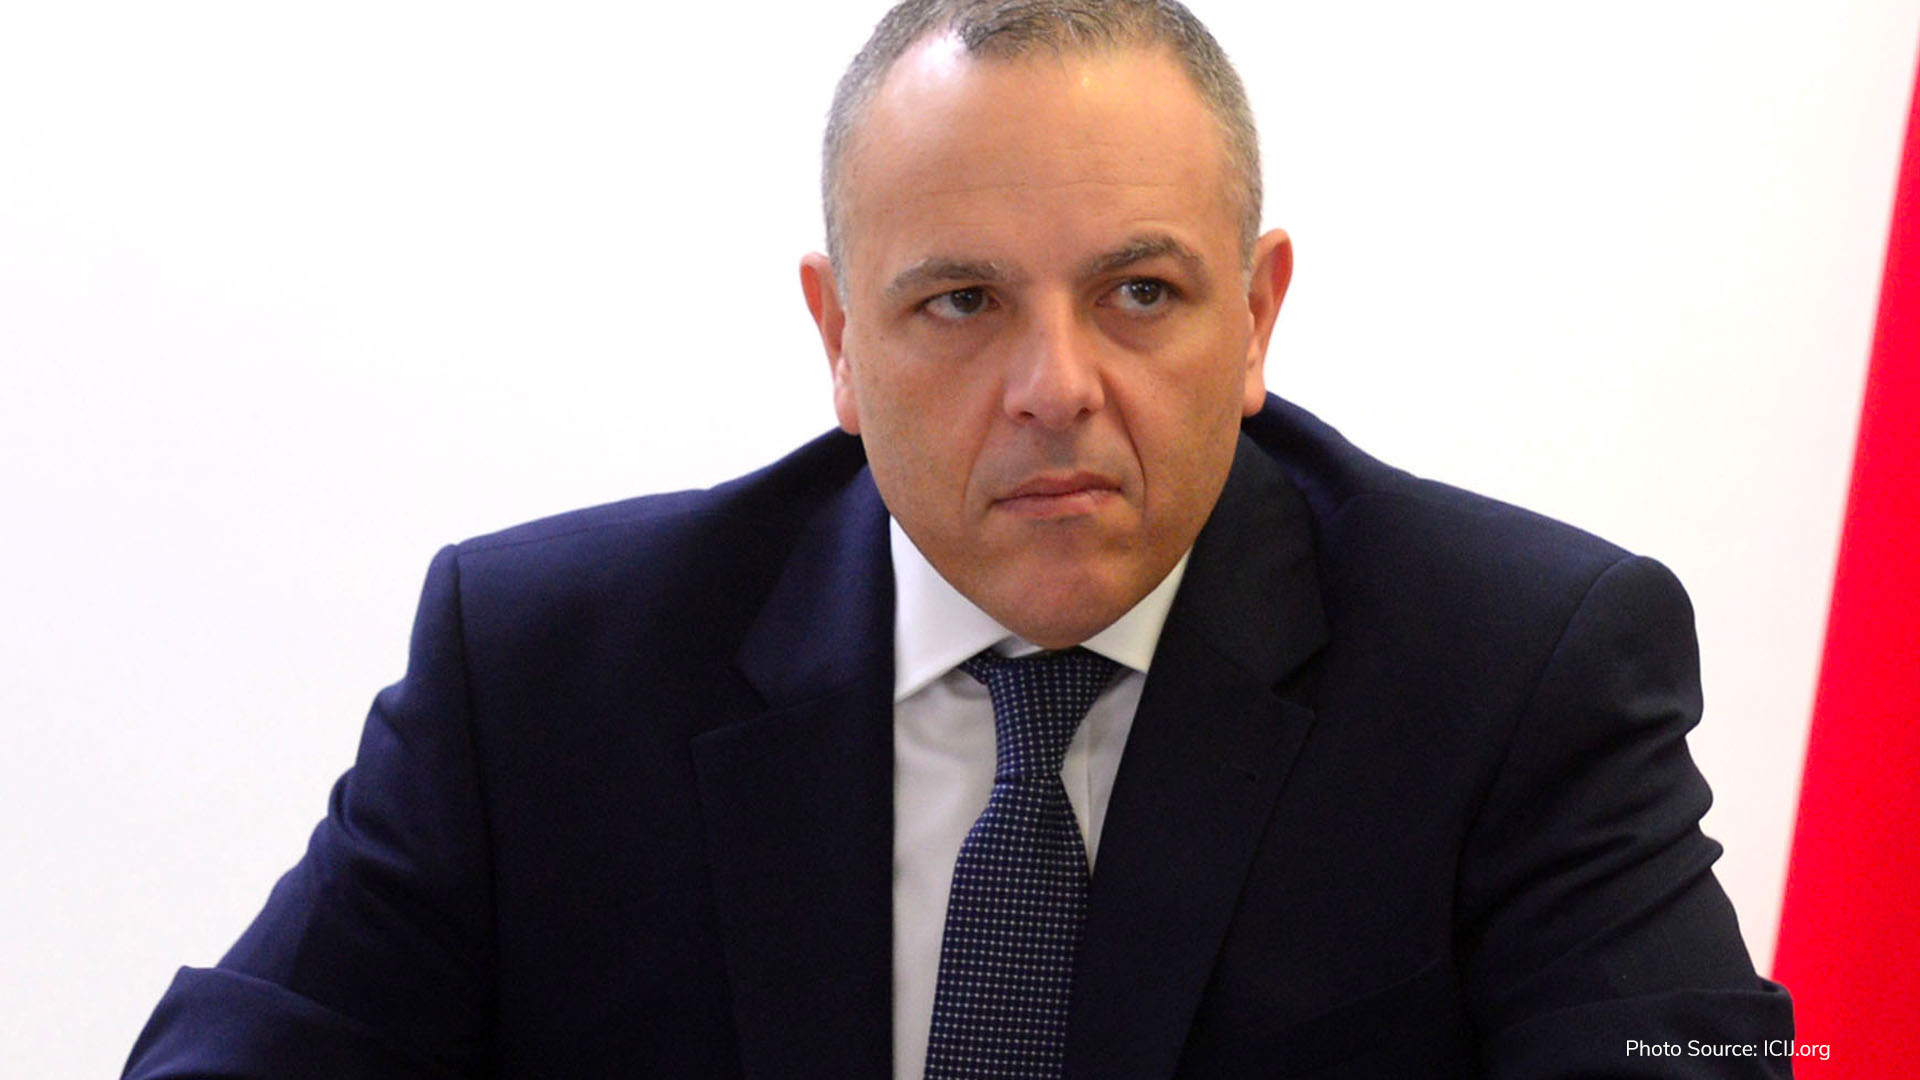 Keith Schembri denied bail and to remain in jail